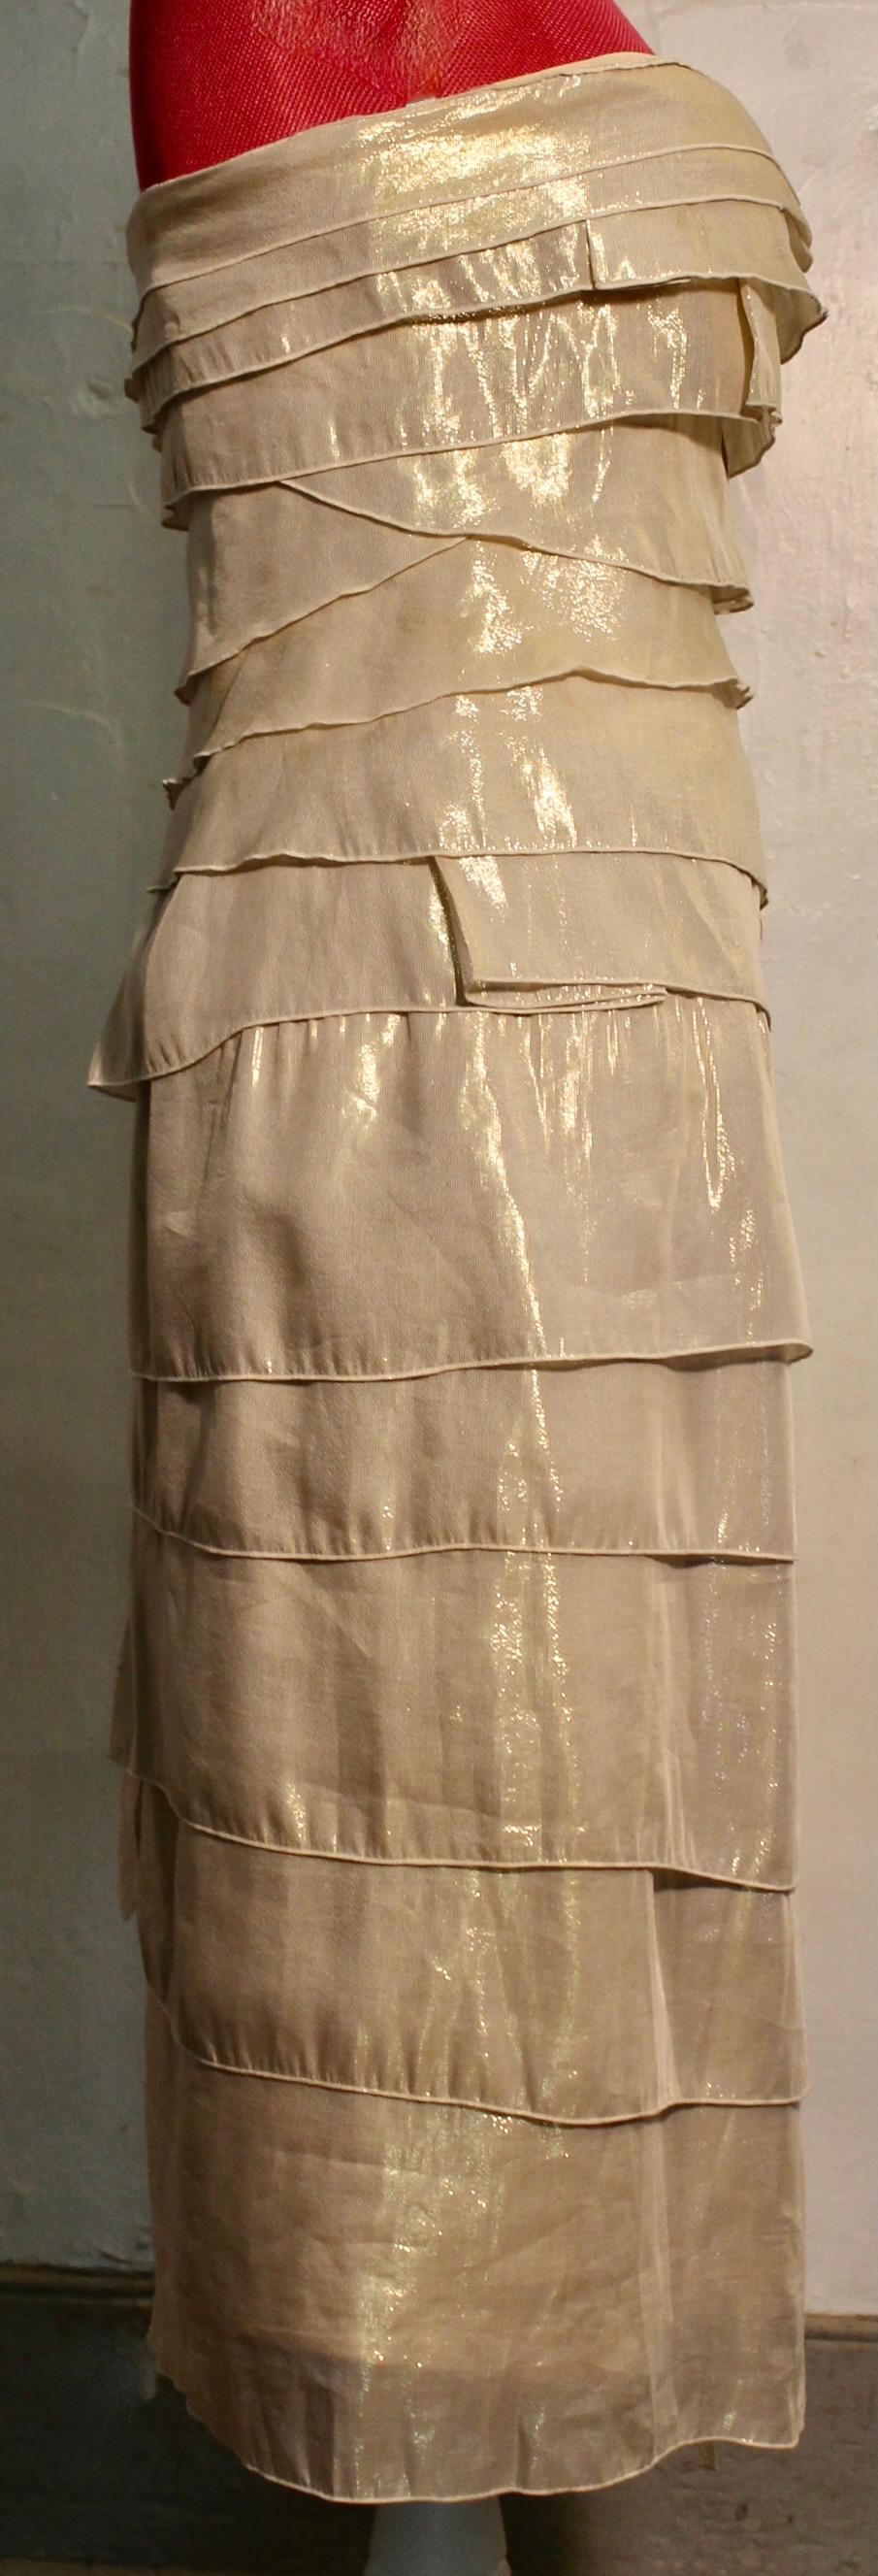 Paco Rabanne Made in Paris Cocktail Dress In Excellent Condition For Sale In Sharon, CT